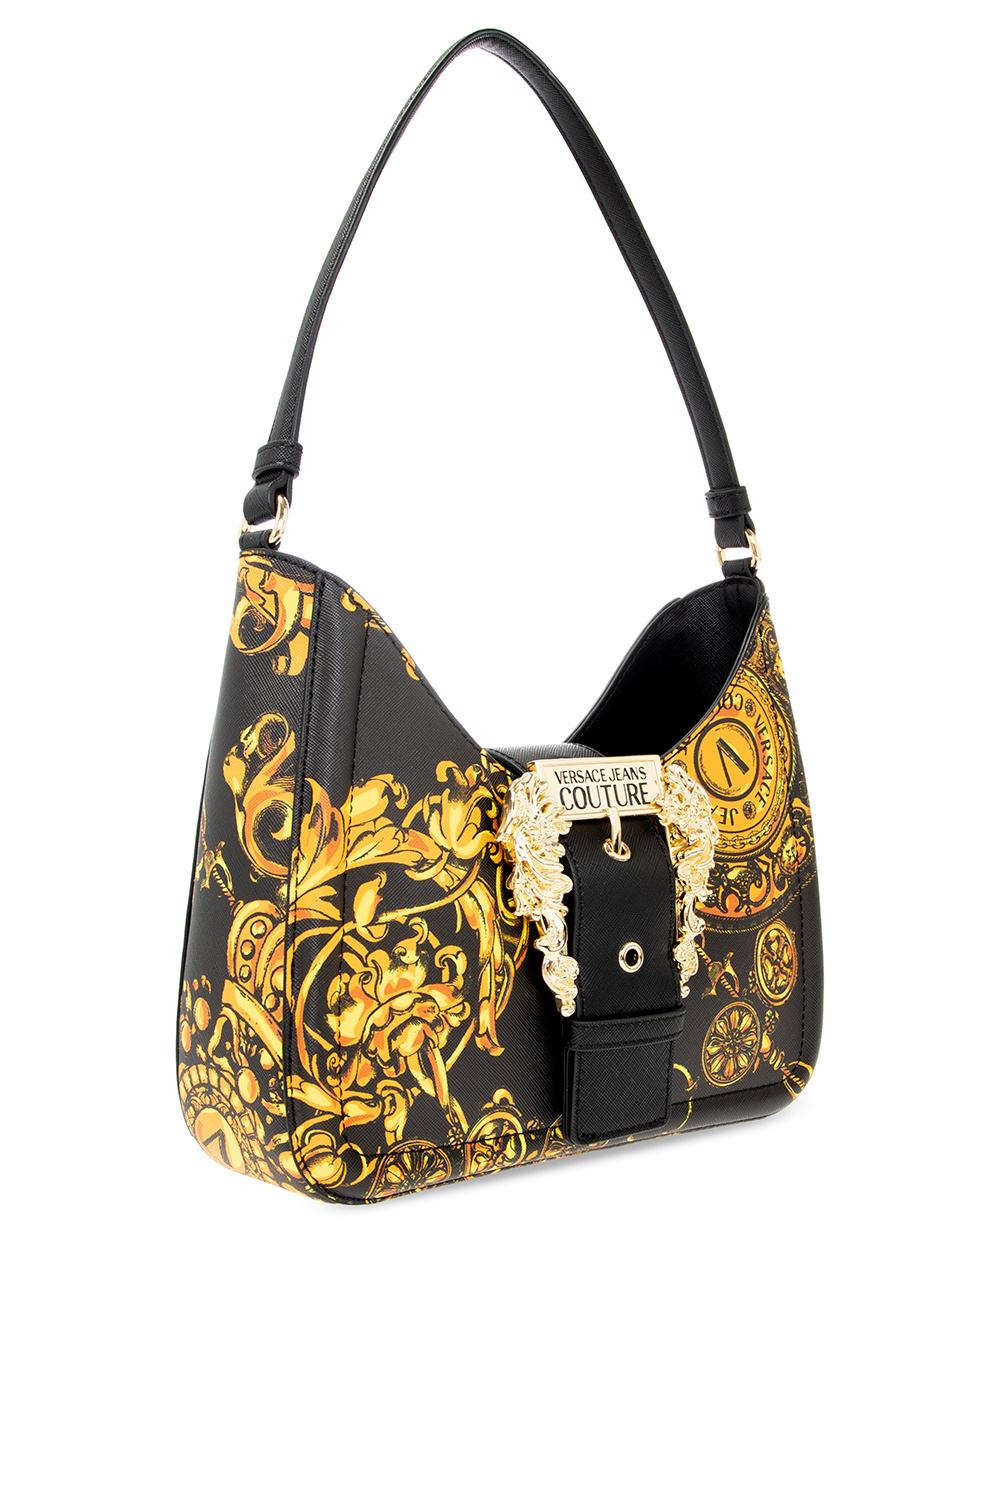 Versace Jeans Couture Hand bag